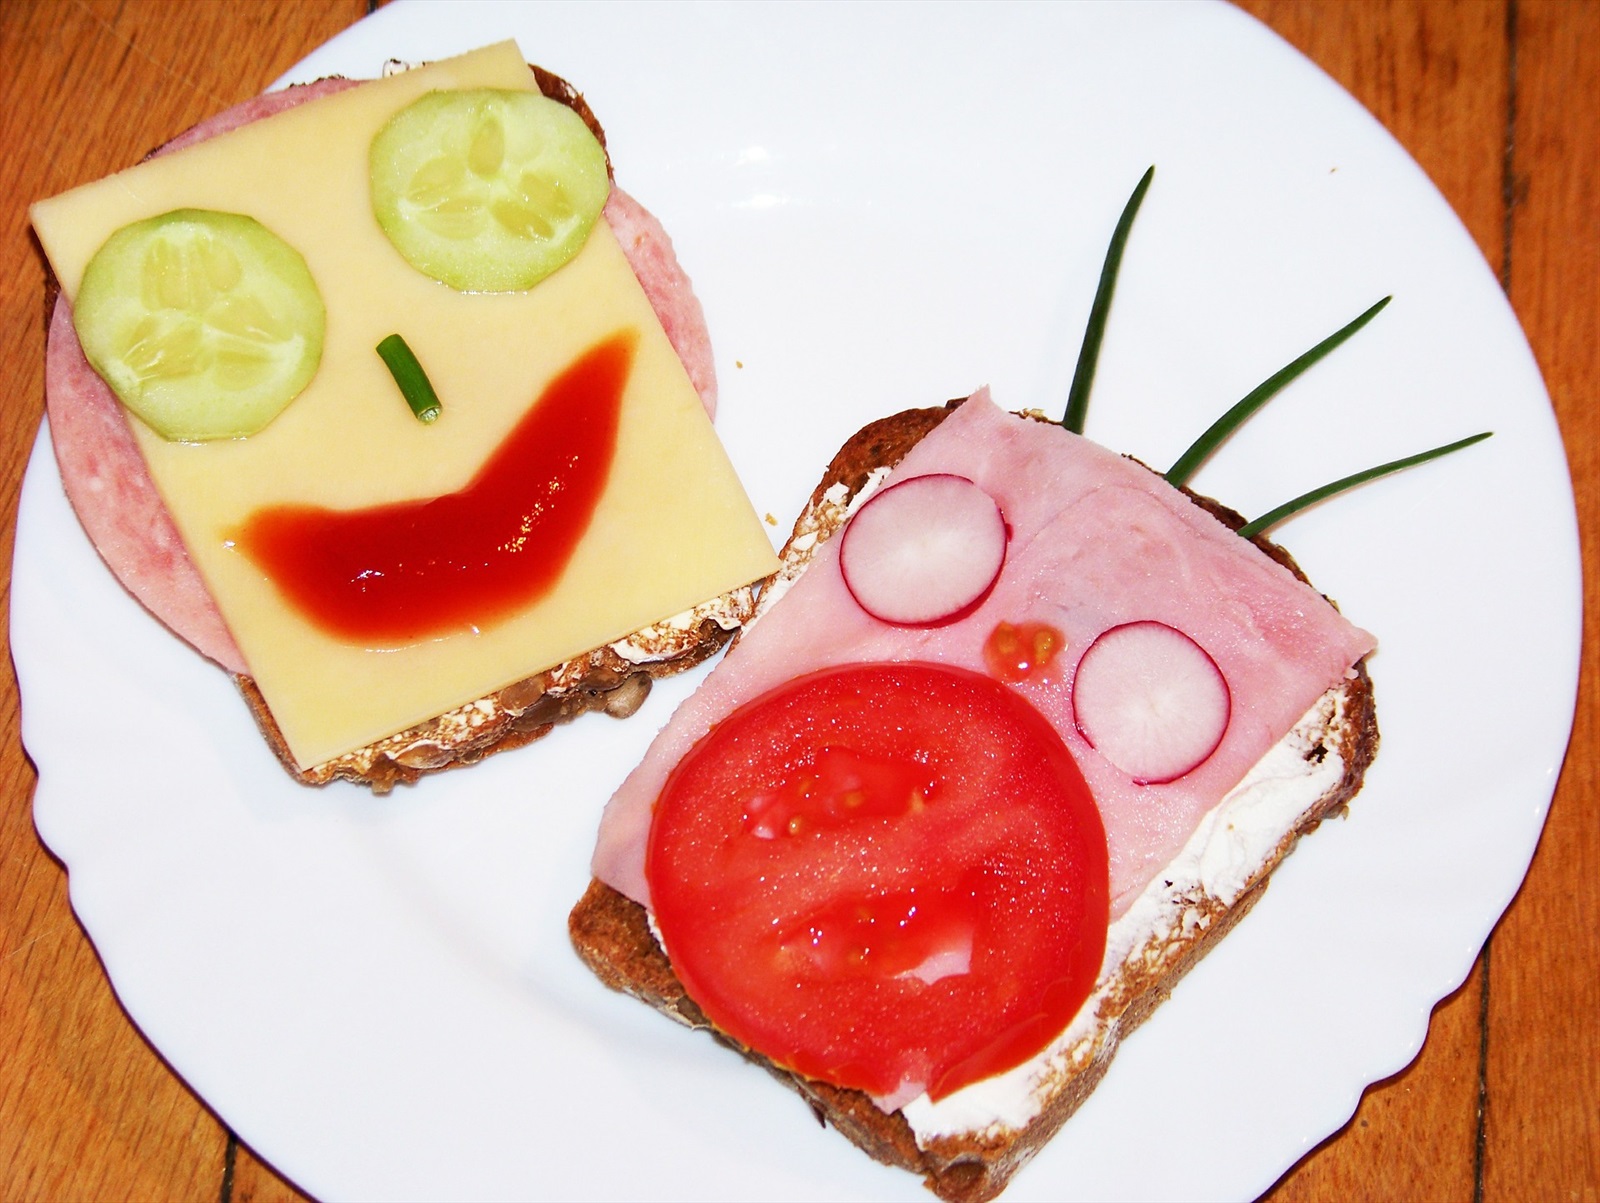 Have fun with fillings on National Sandwich Day